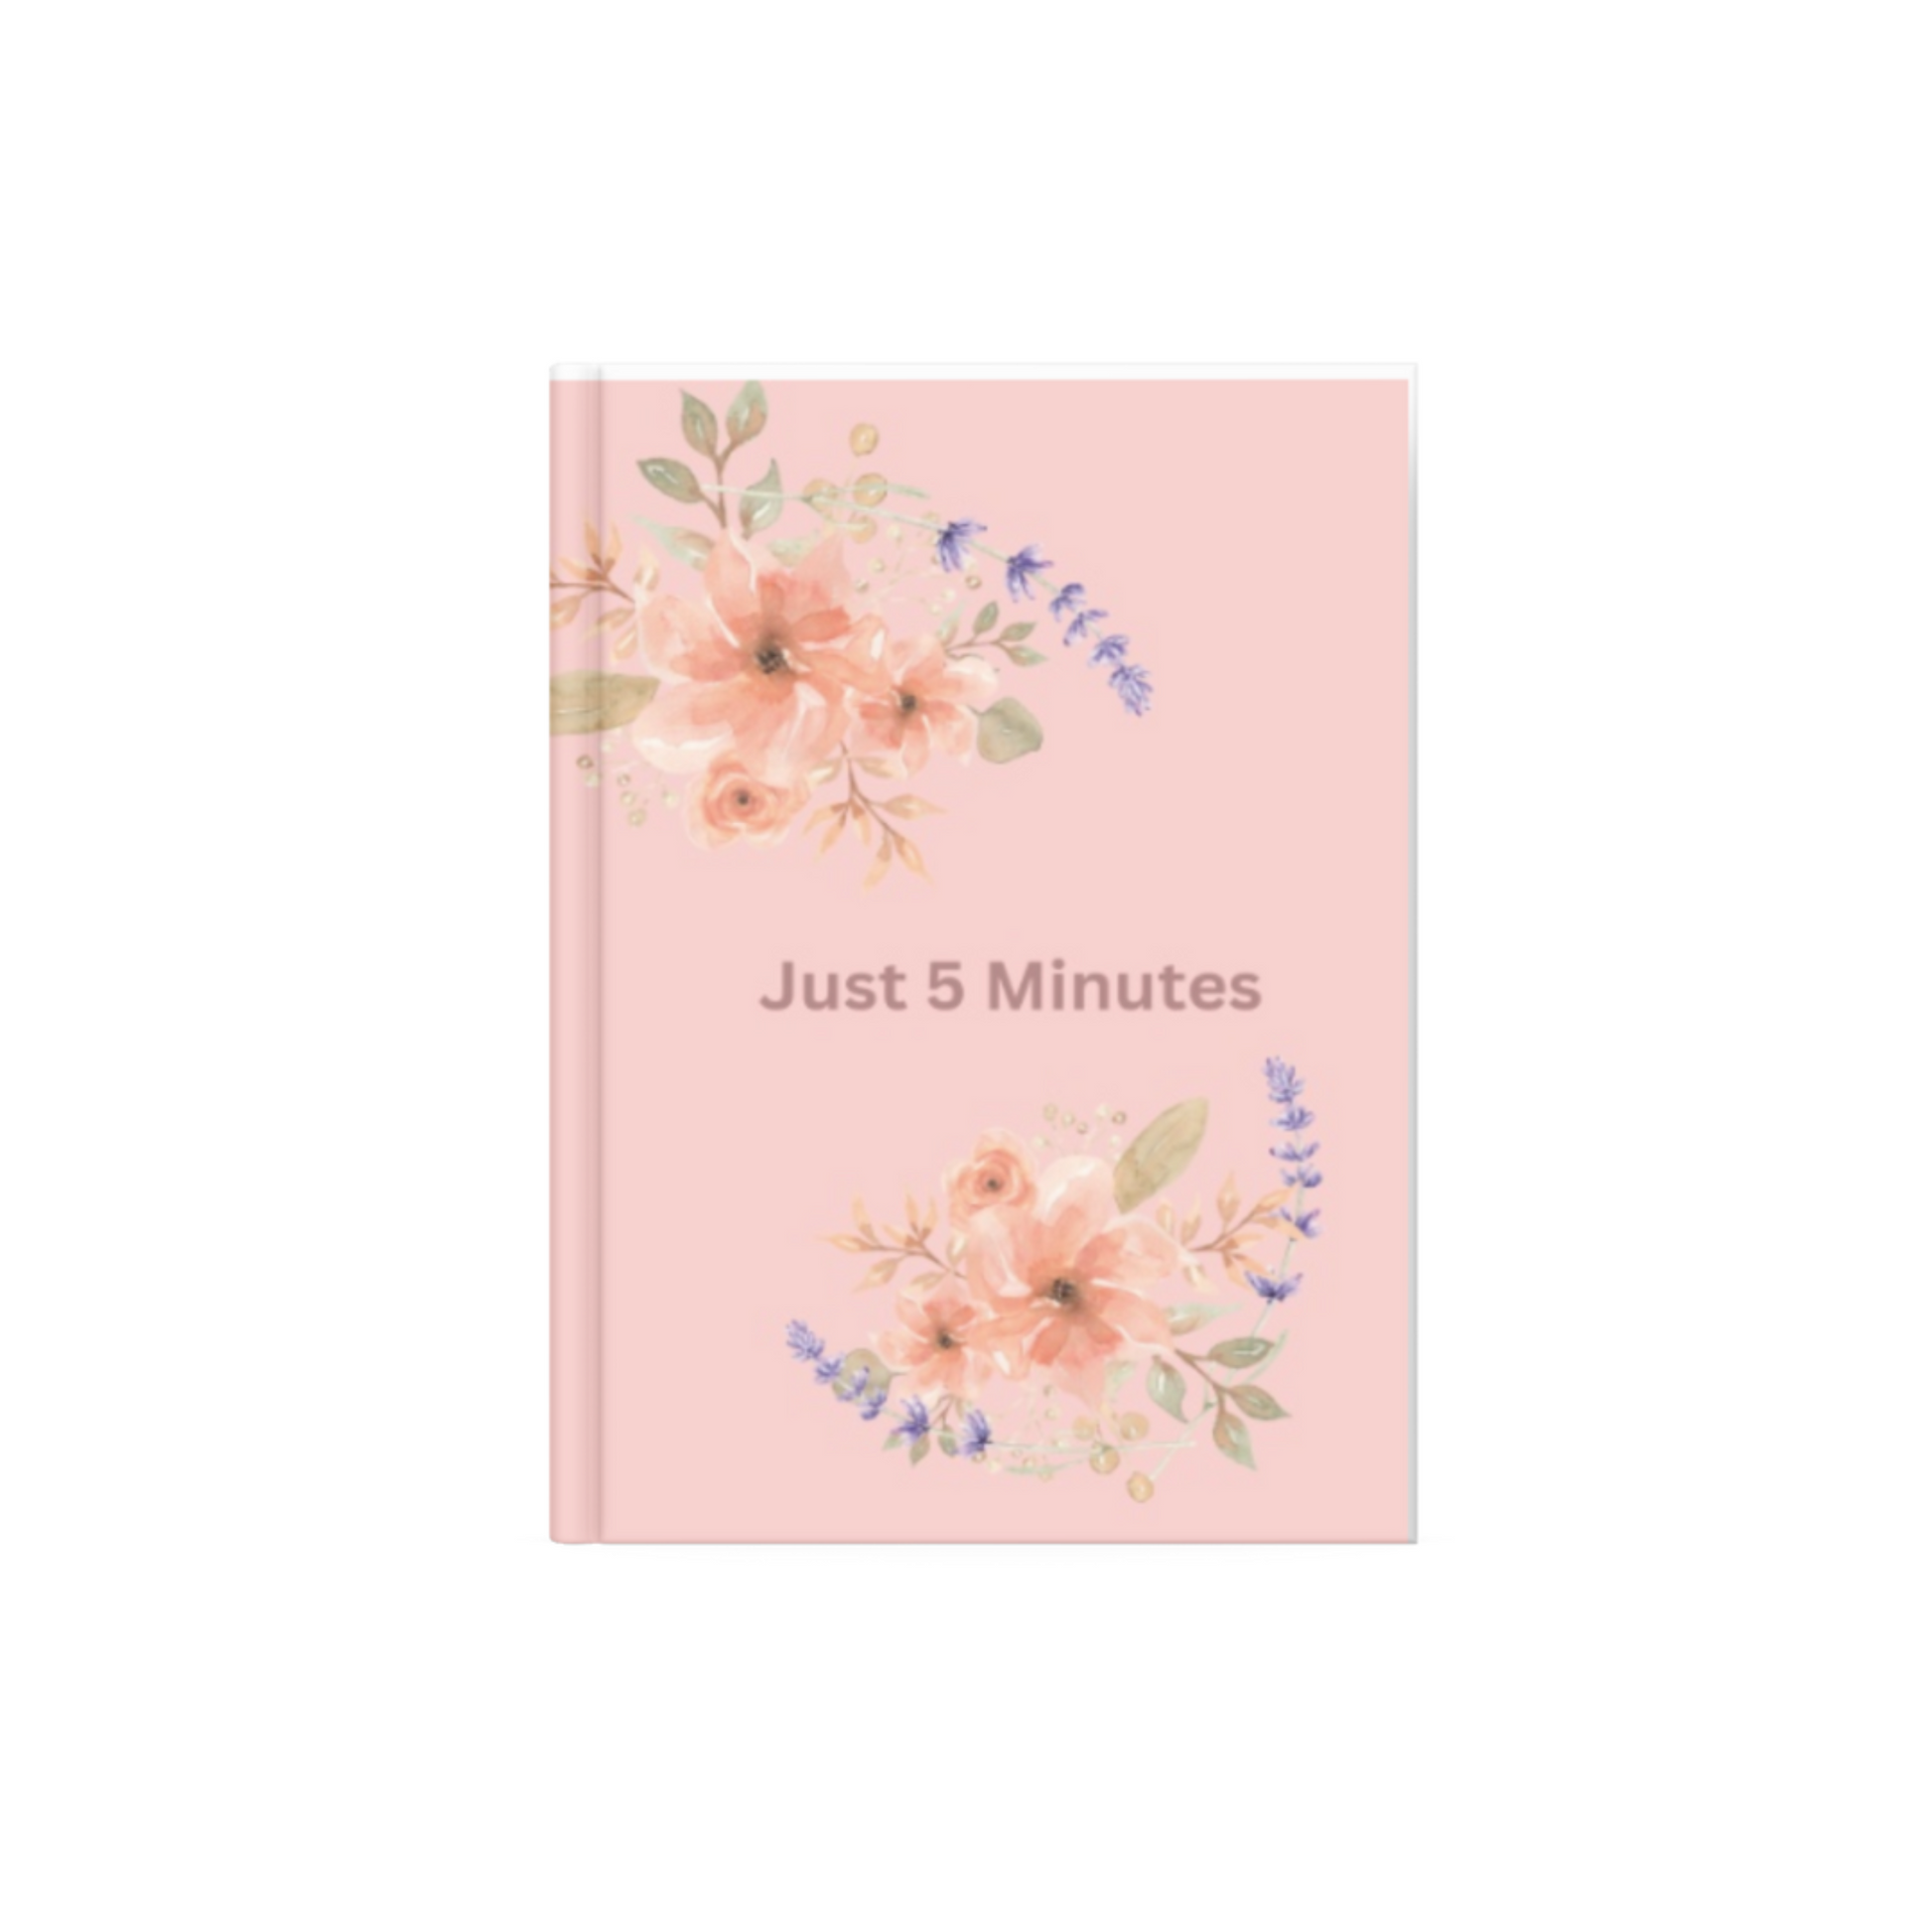 5 minute self-care journal